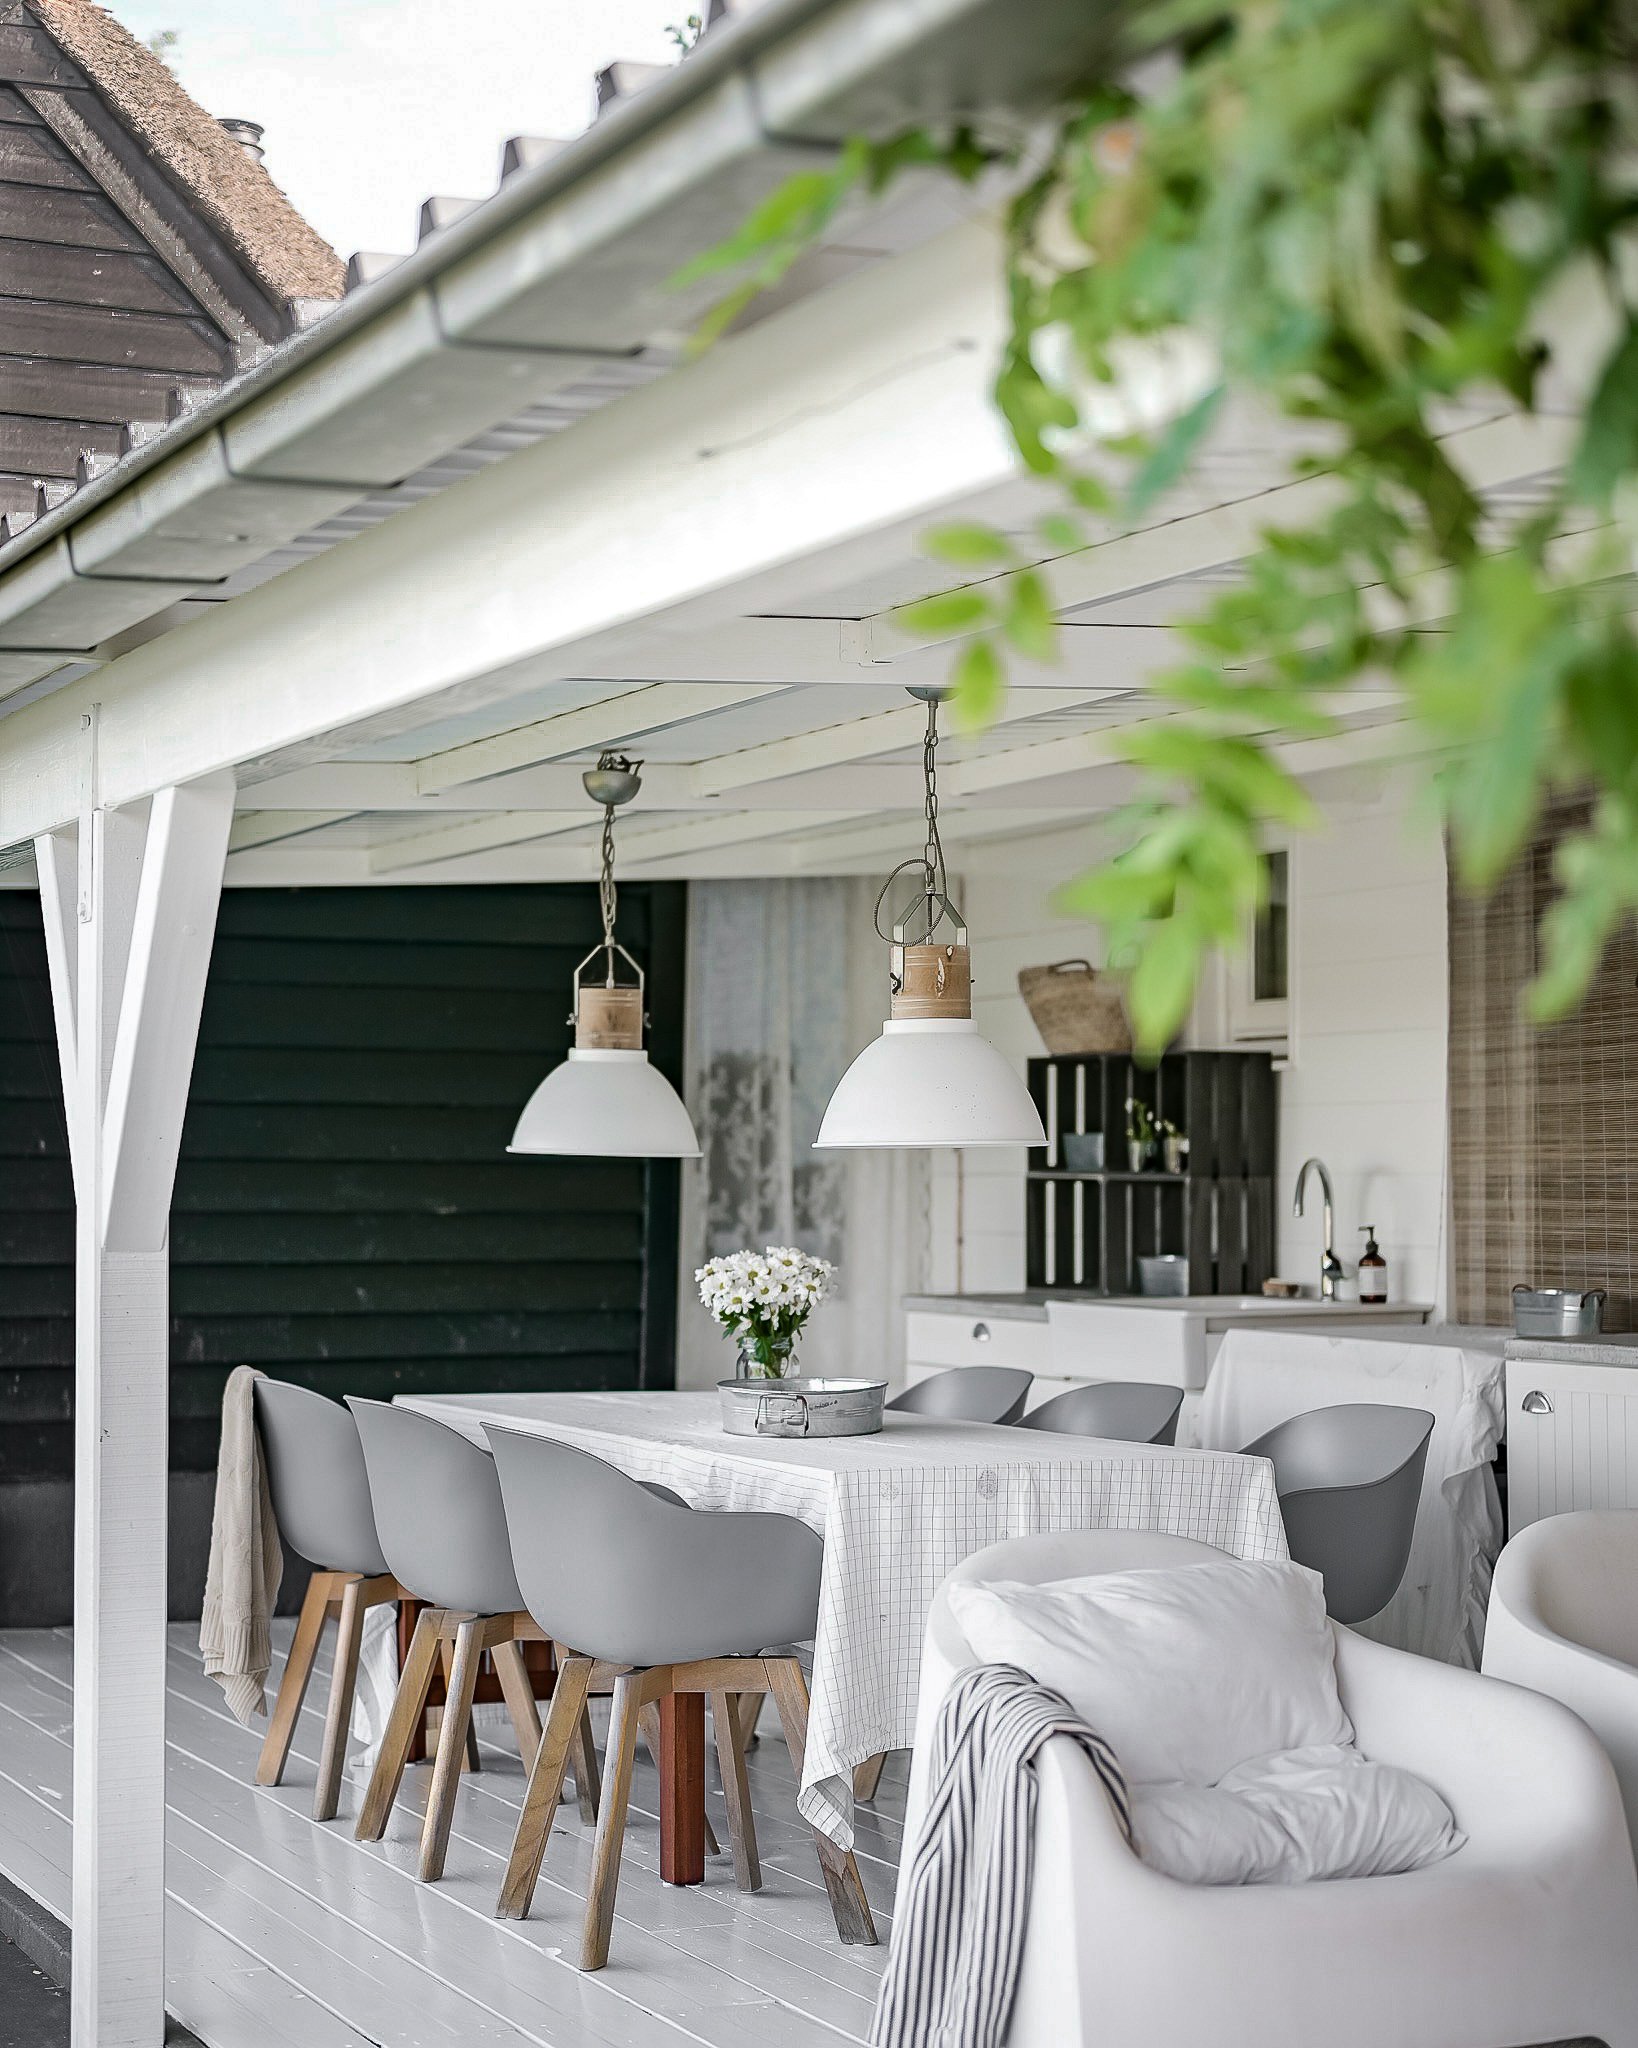 undercover outside seating area in white and grey